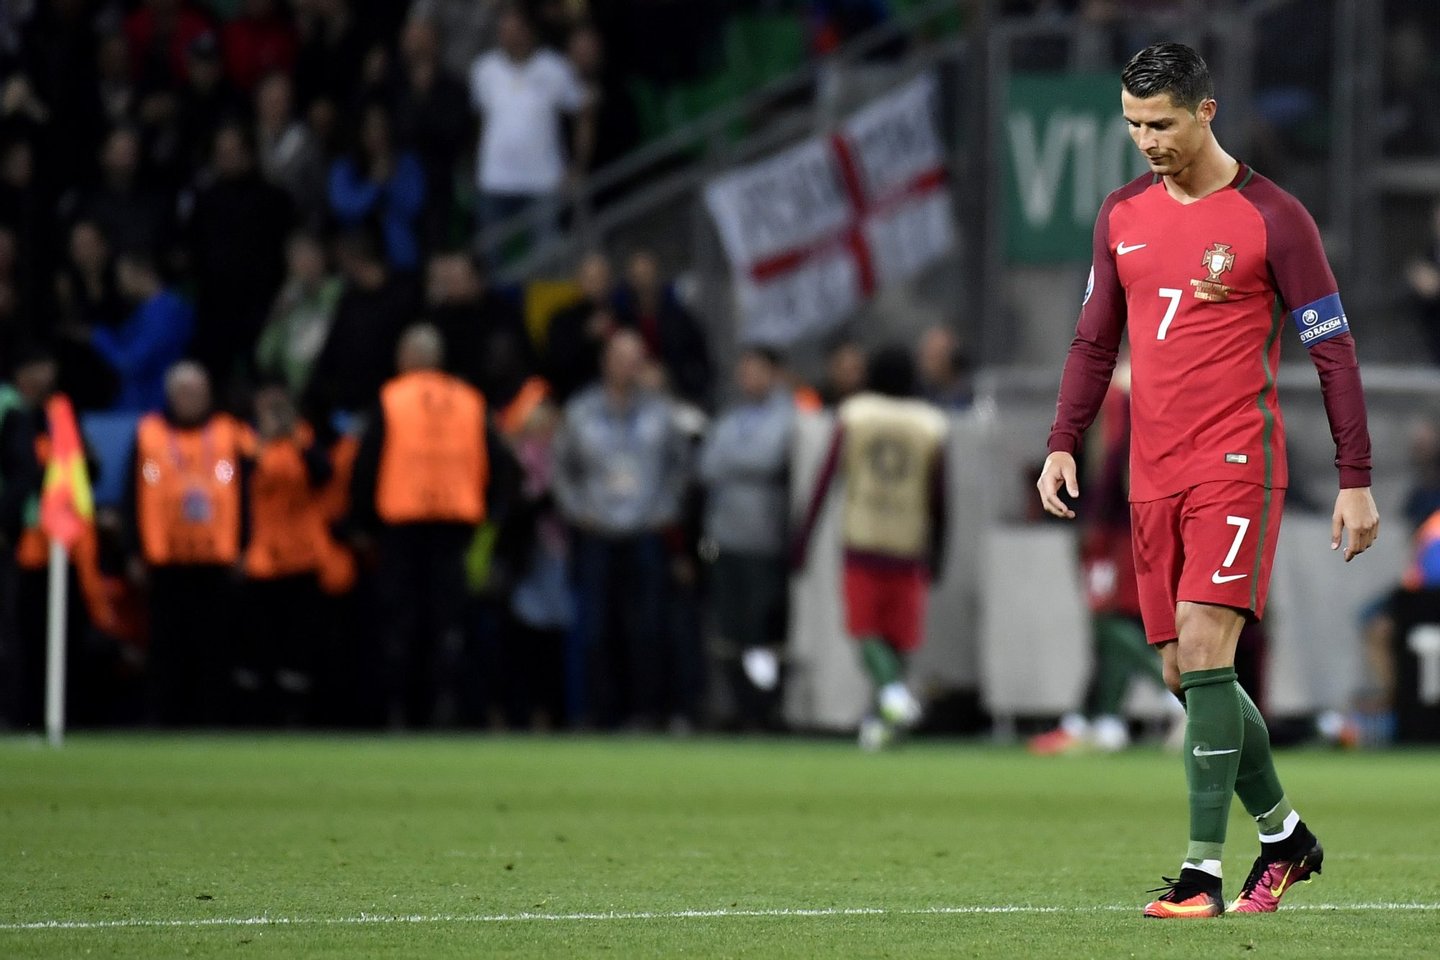 Portugal's forward Cristiano Ronaldo walks on the pitch during the Euro 2016 group F football match between Portugal and Iceland at the Geoffroy-Guichard stadium in Saint-Etienne on June 14, 2016. / AFP / jeff pachoud (Photo credit should read JEFF PACHOUD/AFP/Getty Images)